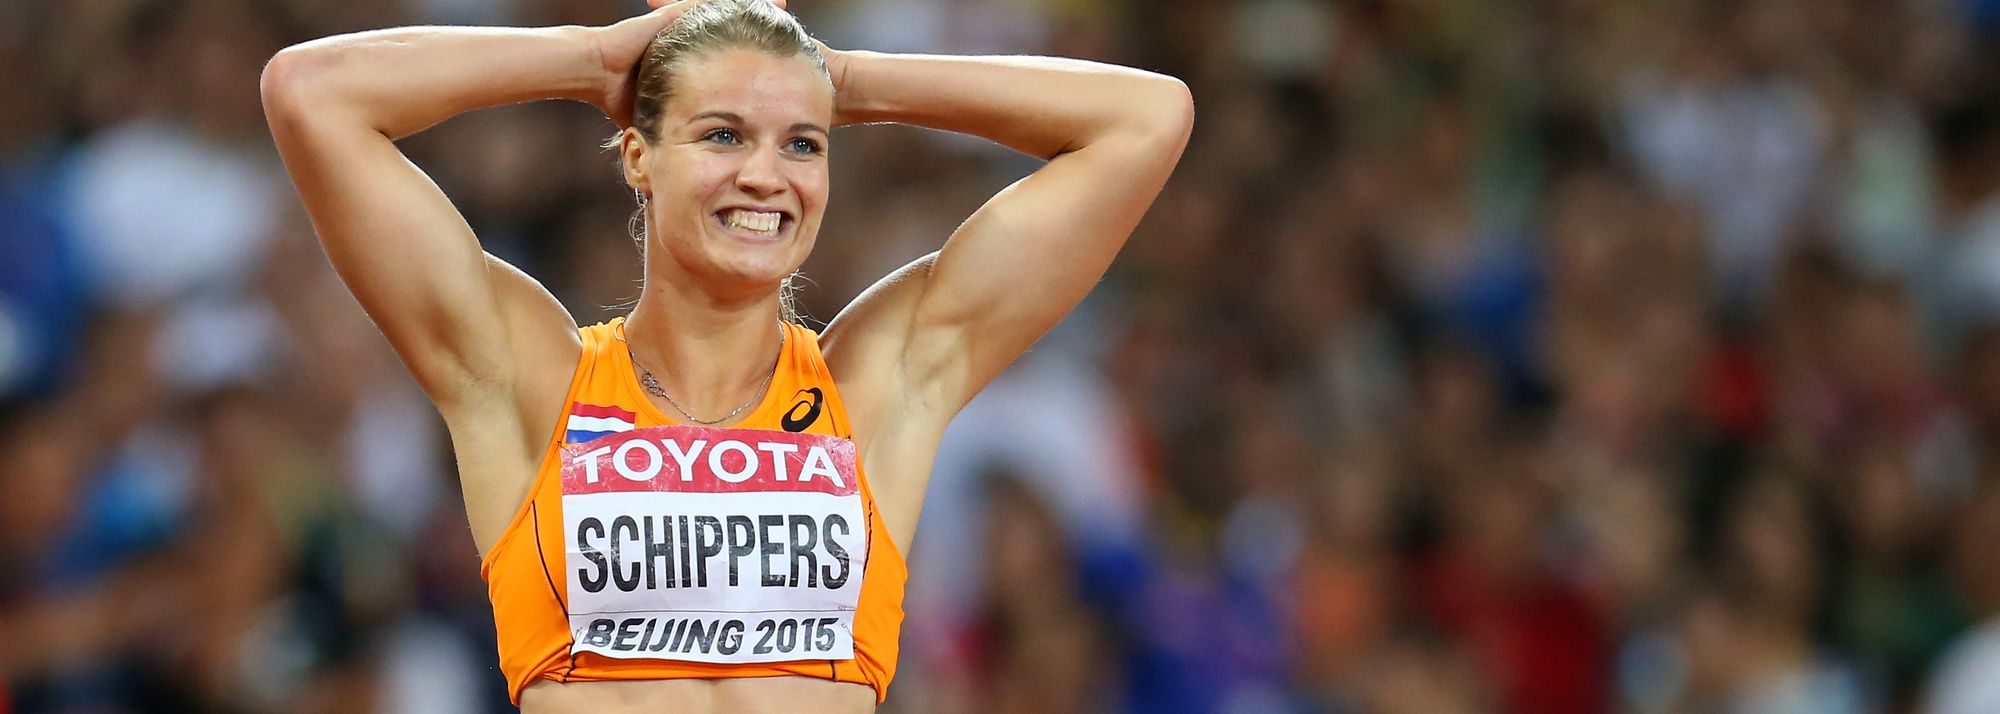 Dafne Schippers won two world 200m titles and multiple other major medals during a highly successful sprinting and combined events career